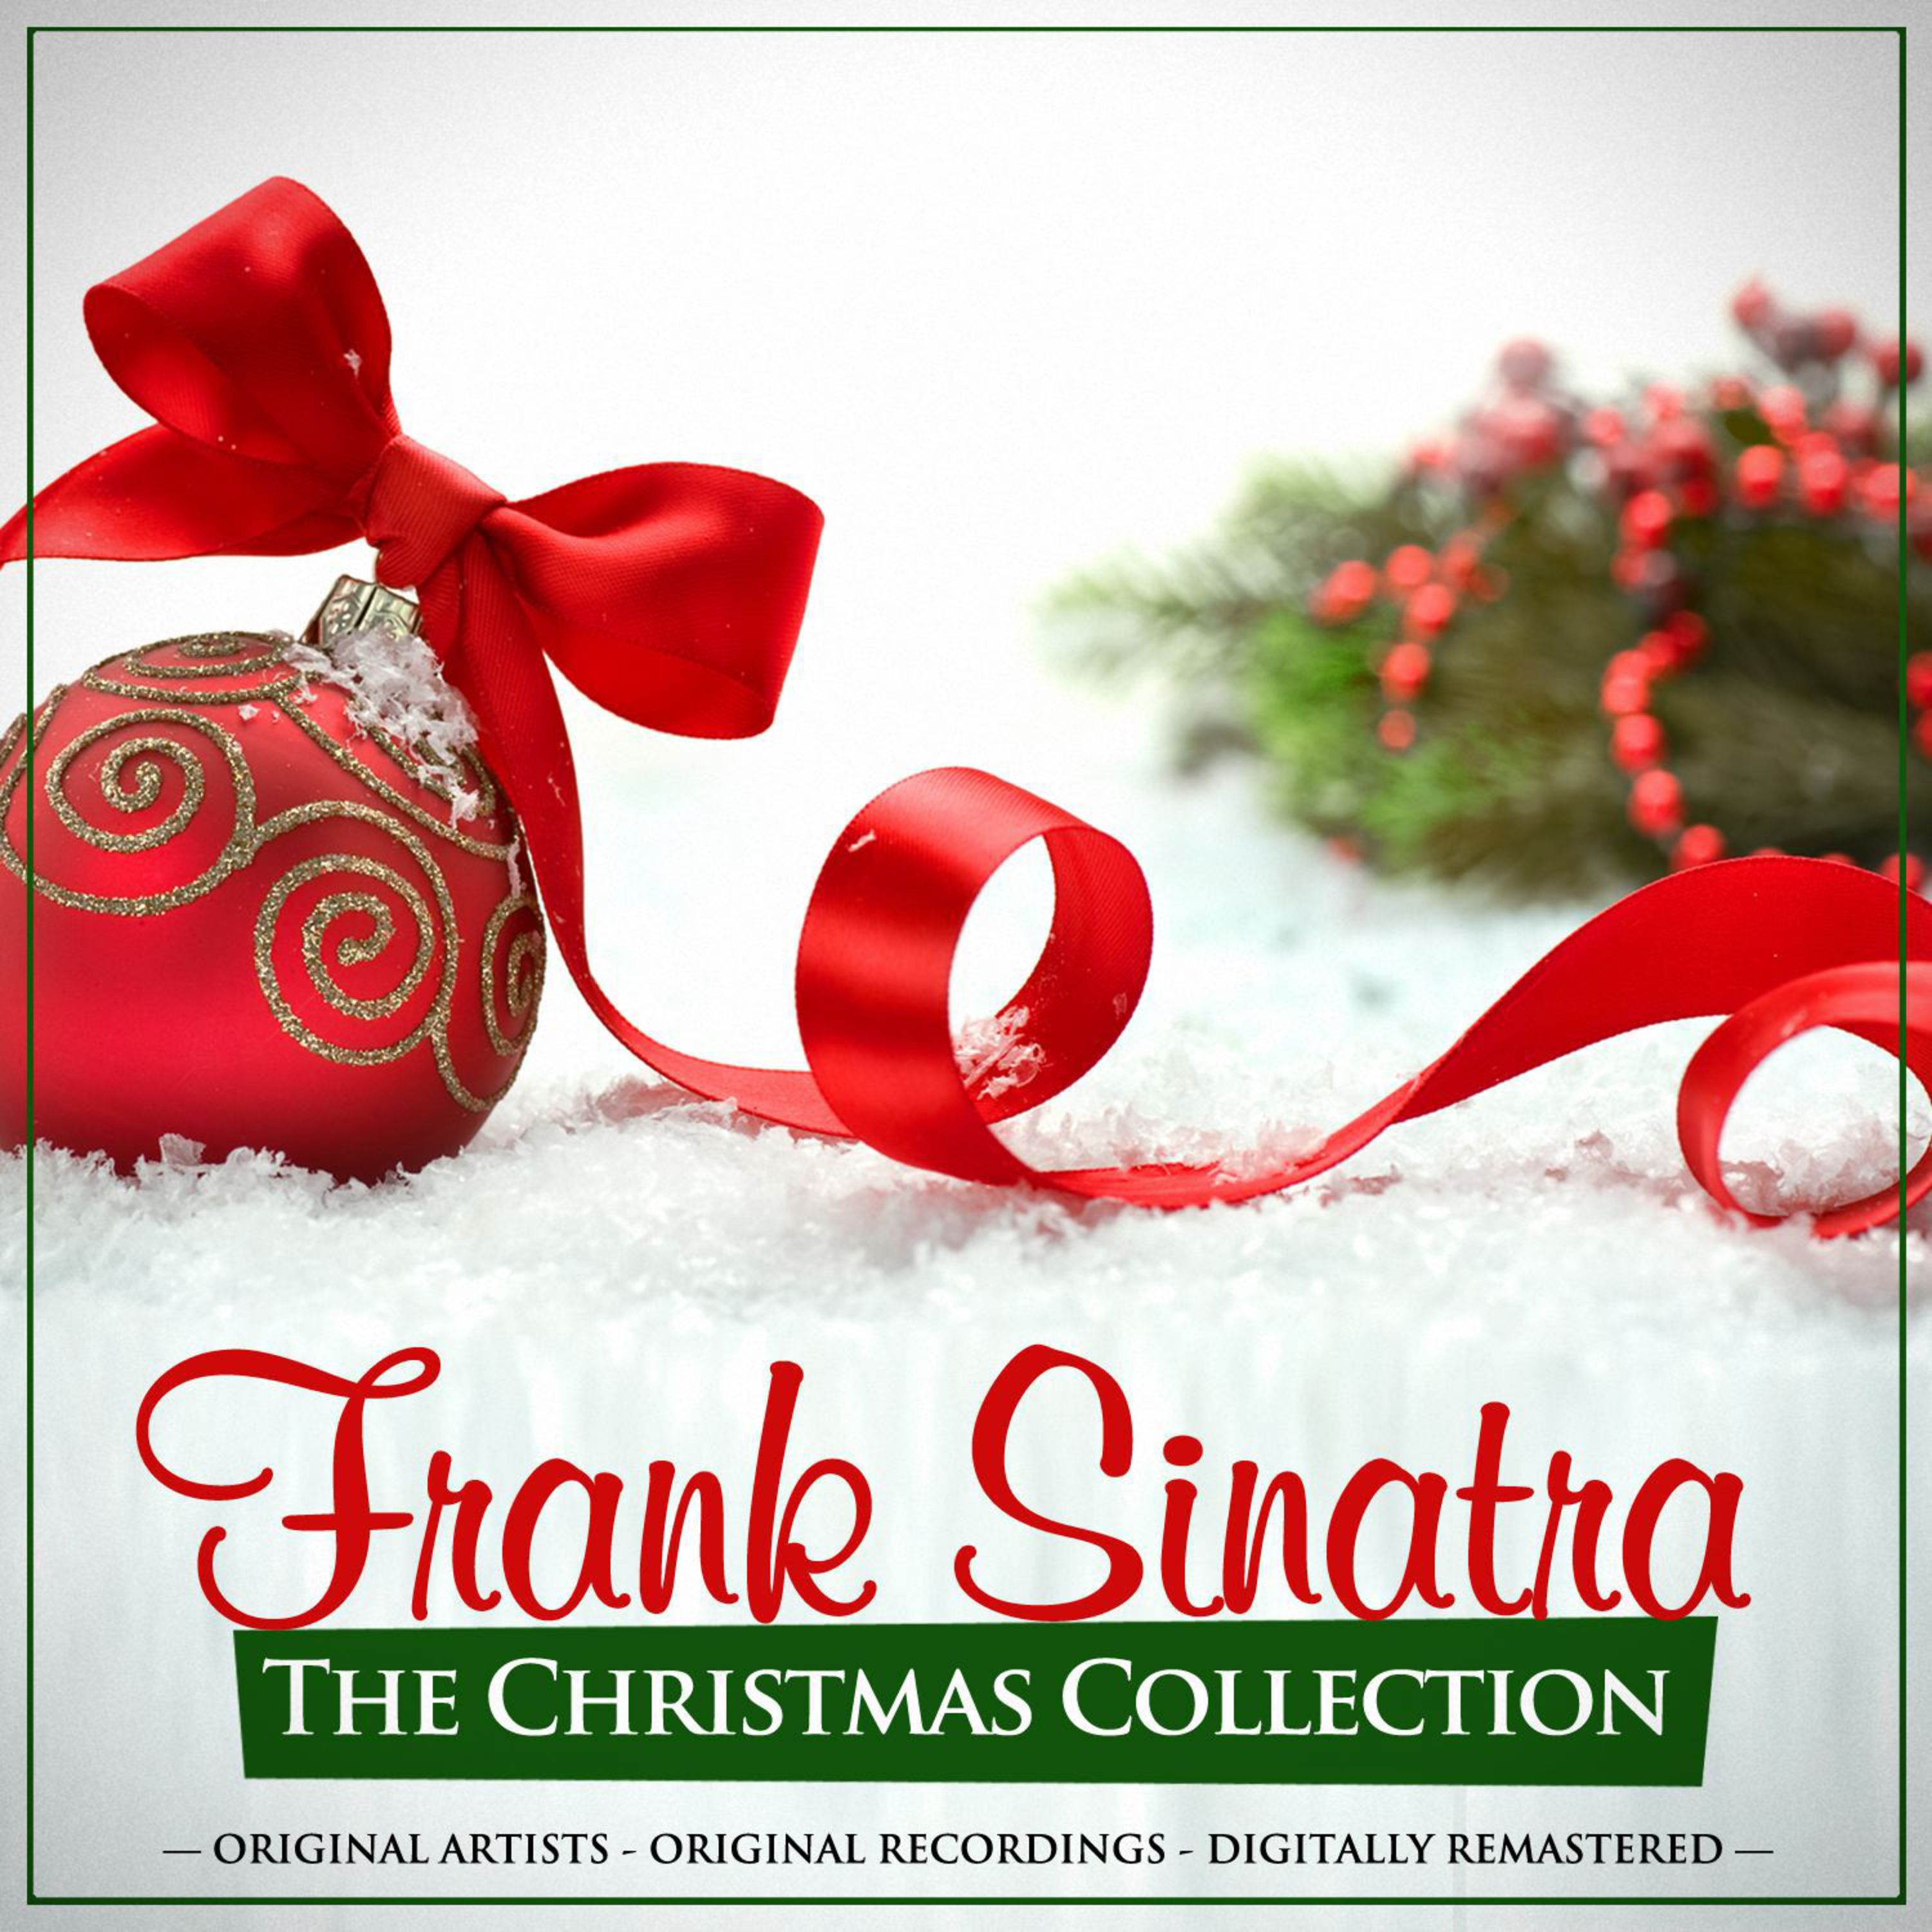 The Christmas Collection: Frank Sinatra (Remastered)